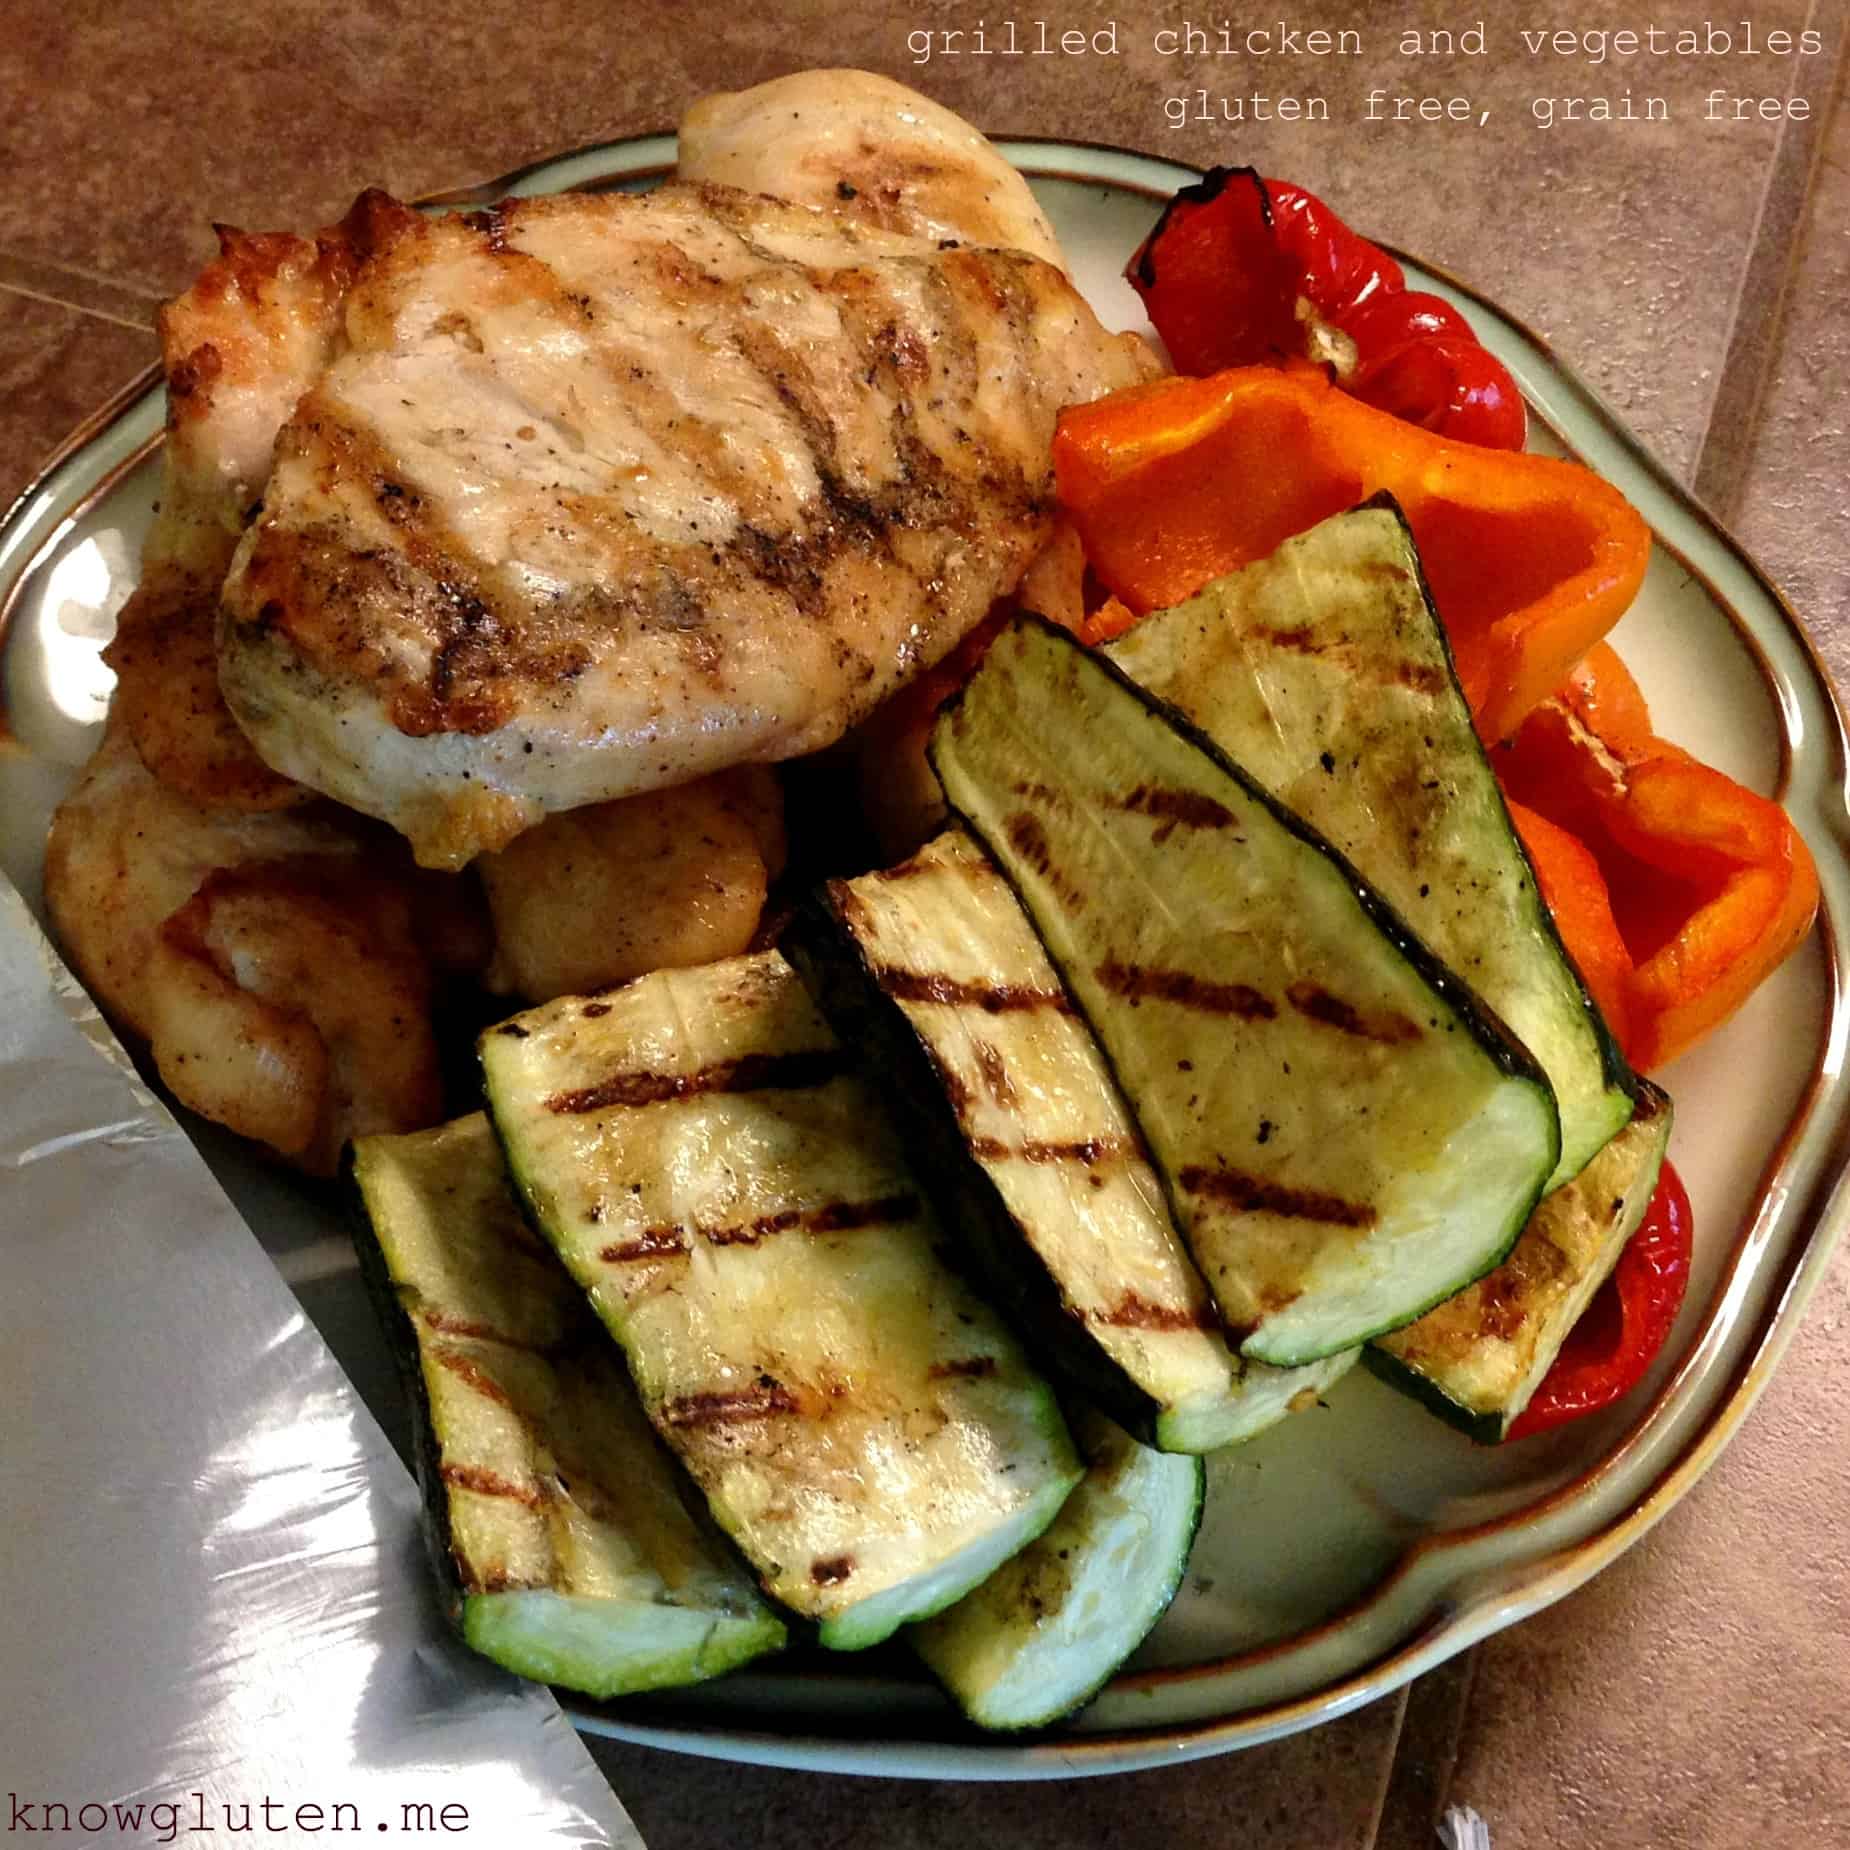 grilled chicken and vegetables - gluten free, grain free, from know gluten.me